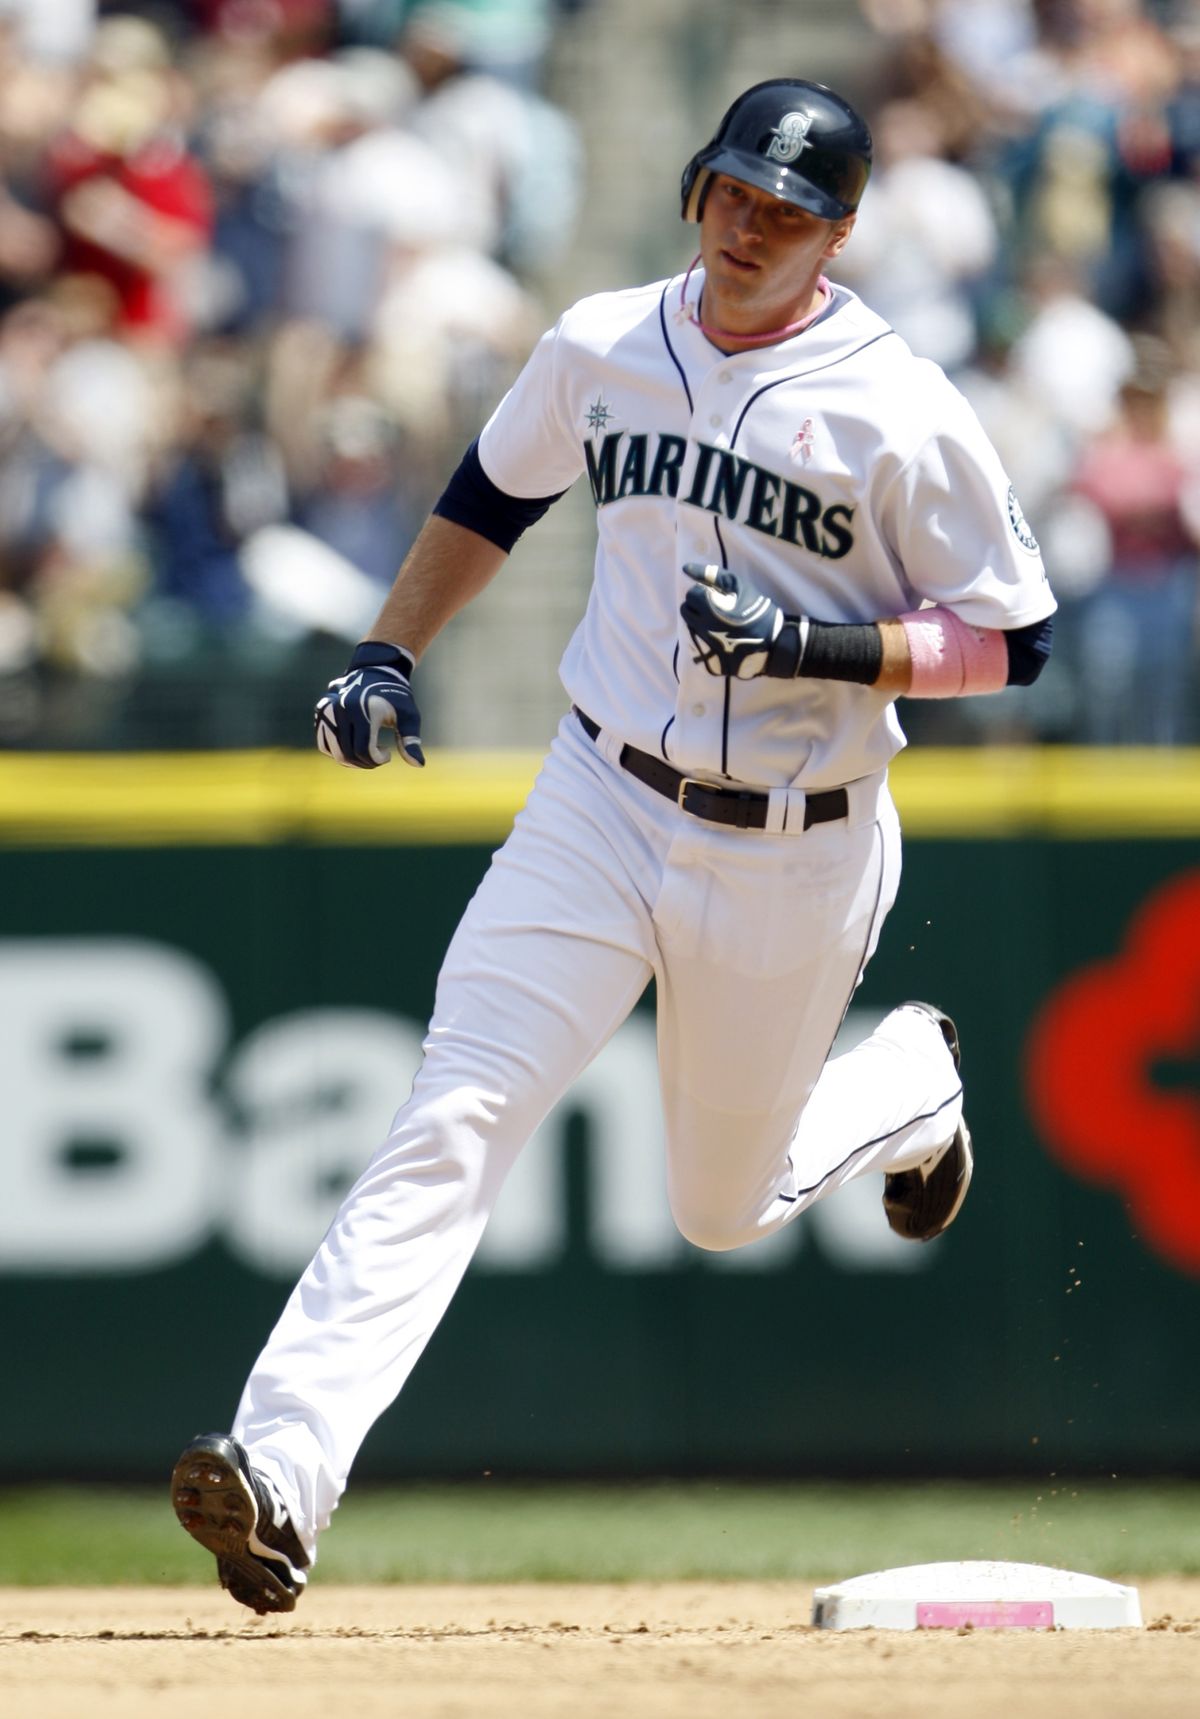 Michael Saunders rounds second after hitting his first major league home run. (Associated Press)